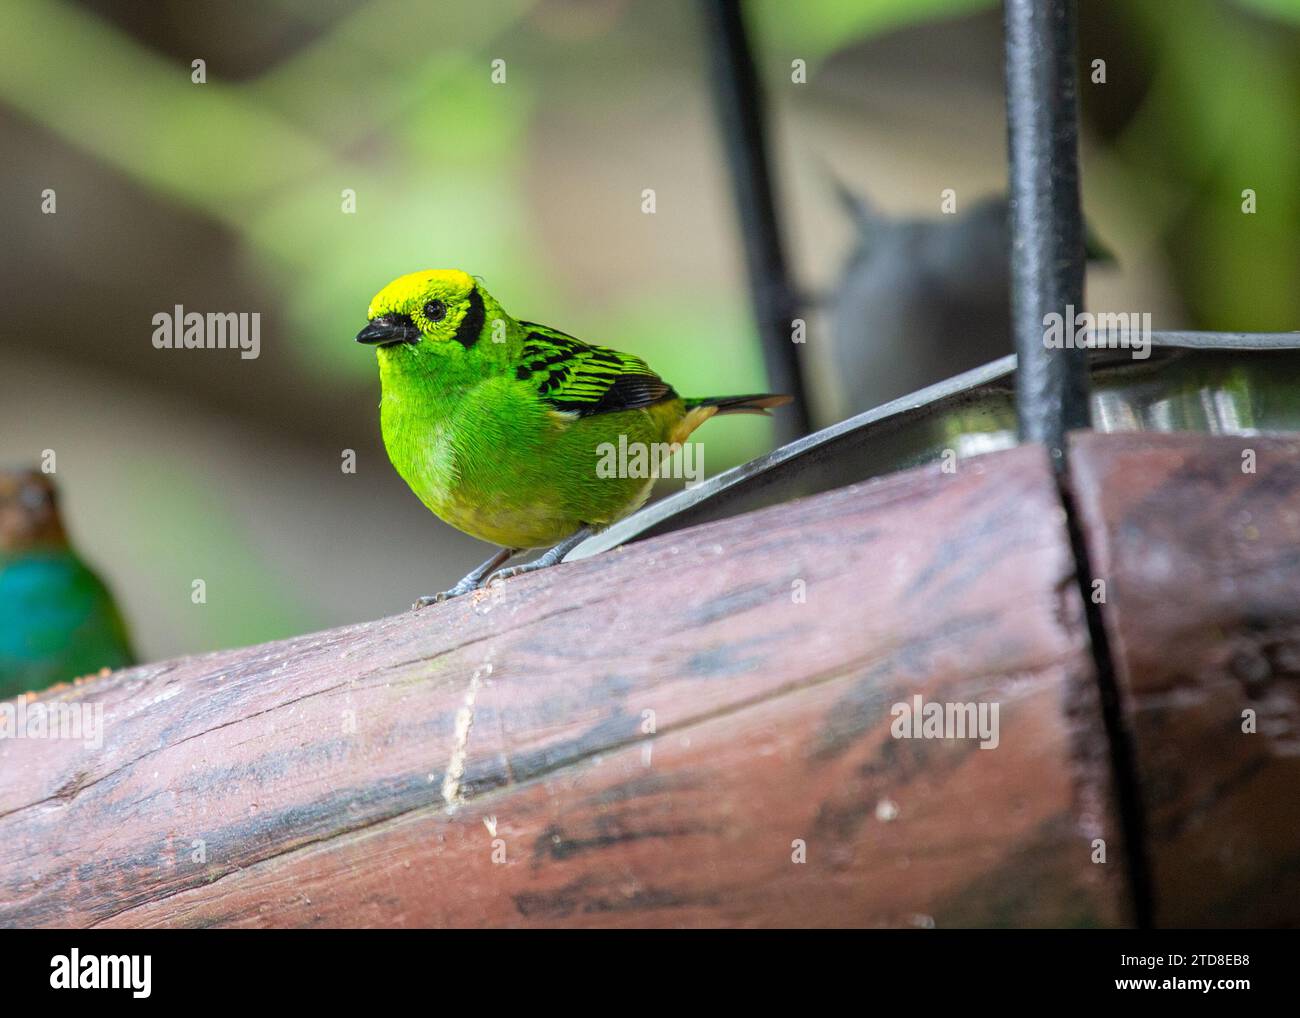 The resplendent Emerald Tanager (Tangara florida), a dazzling jewel in South American rainforests. With its vibrant green and blue plumage, this small Stock Photo